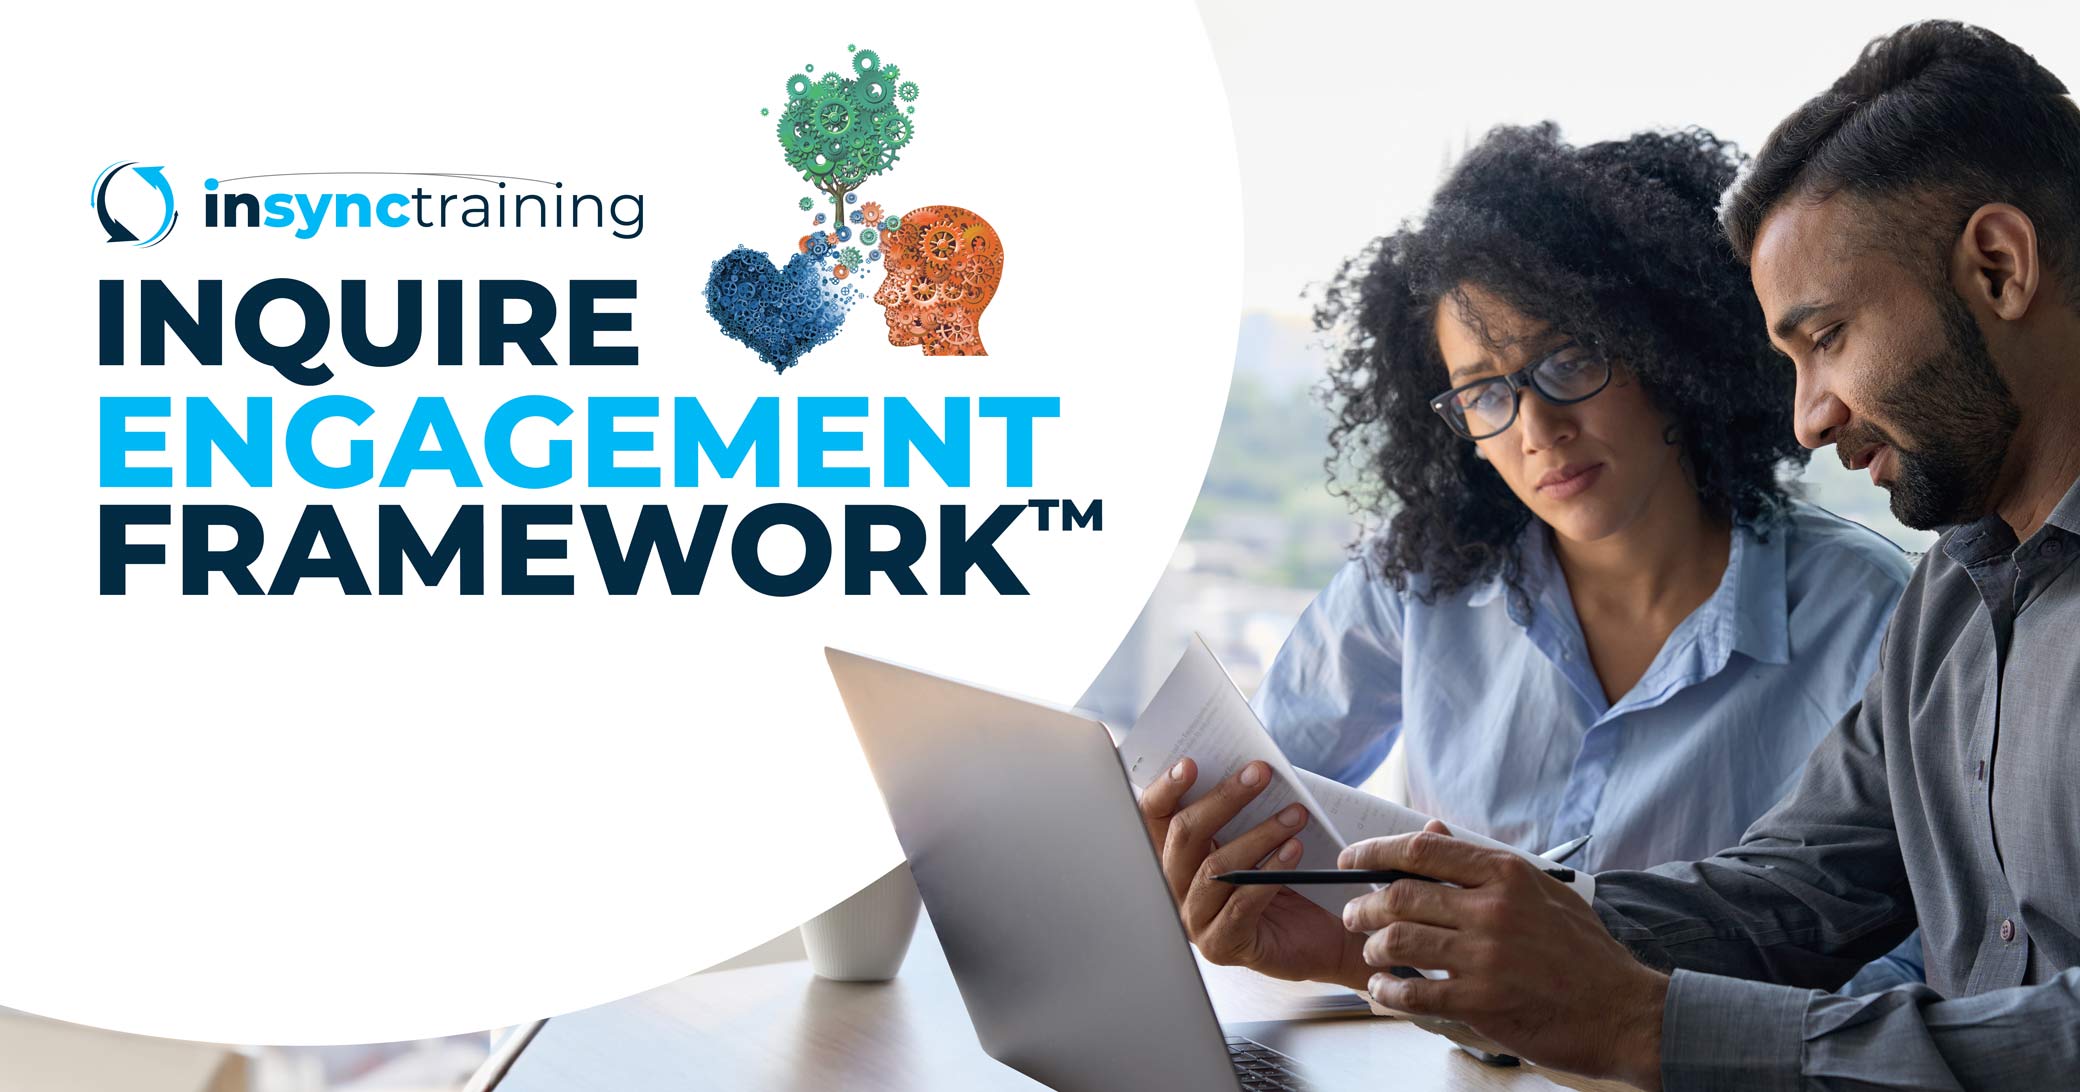 Introducing the Enhanced InQuire Engagement Framework™